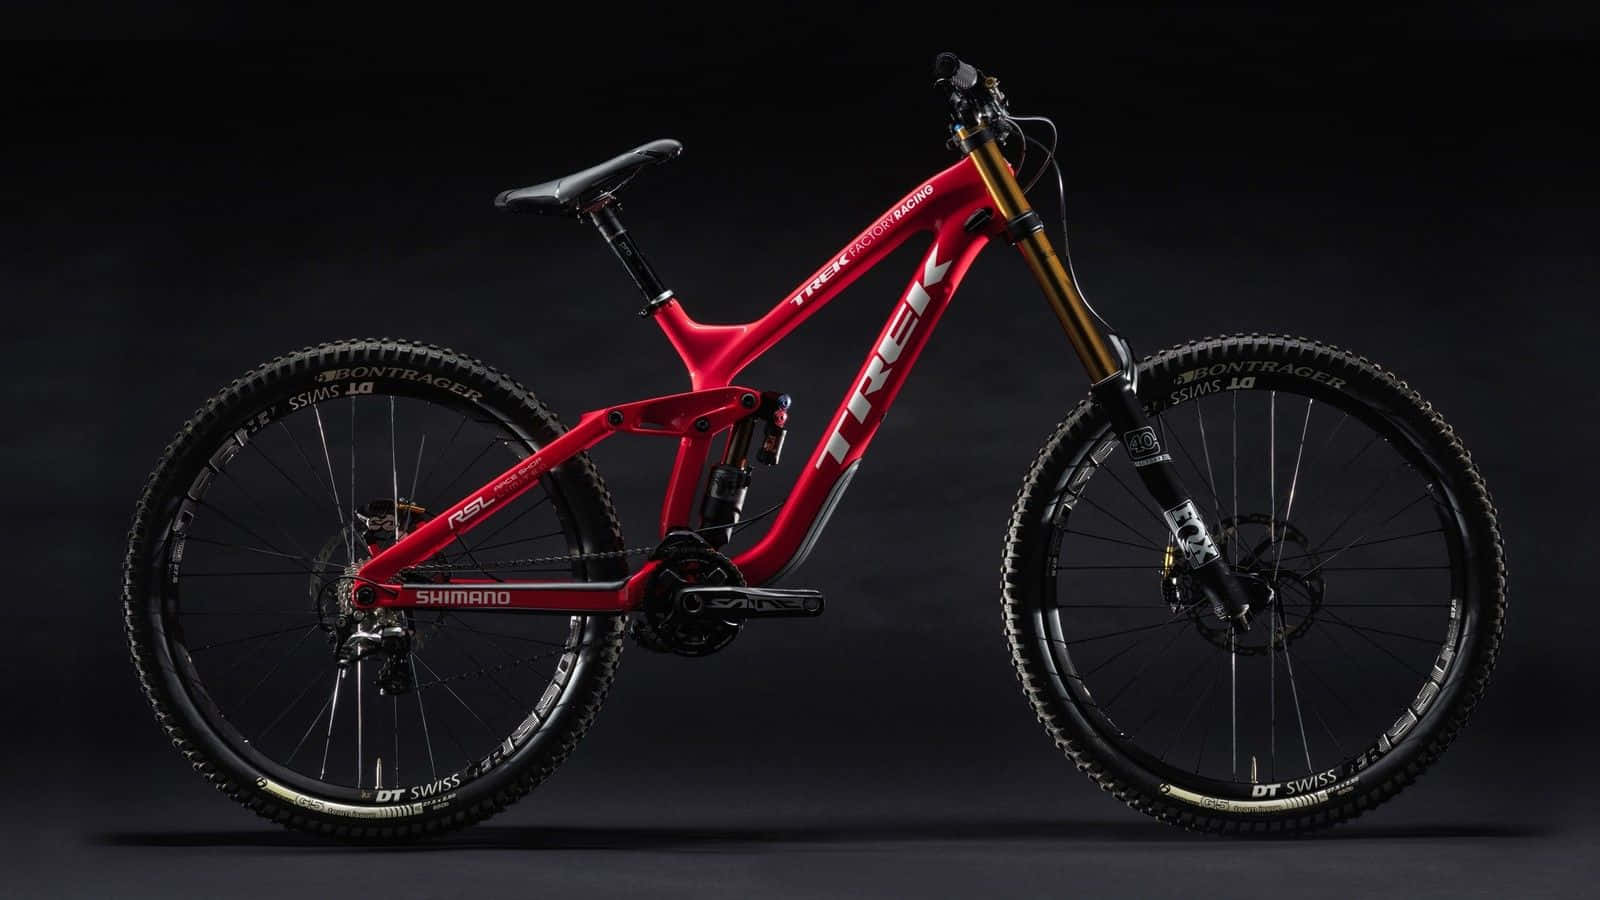 A Red Mountain Bike Is Shown Against A Black Background